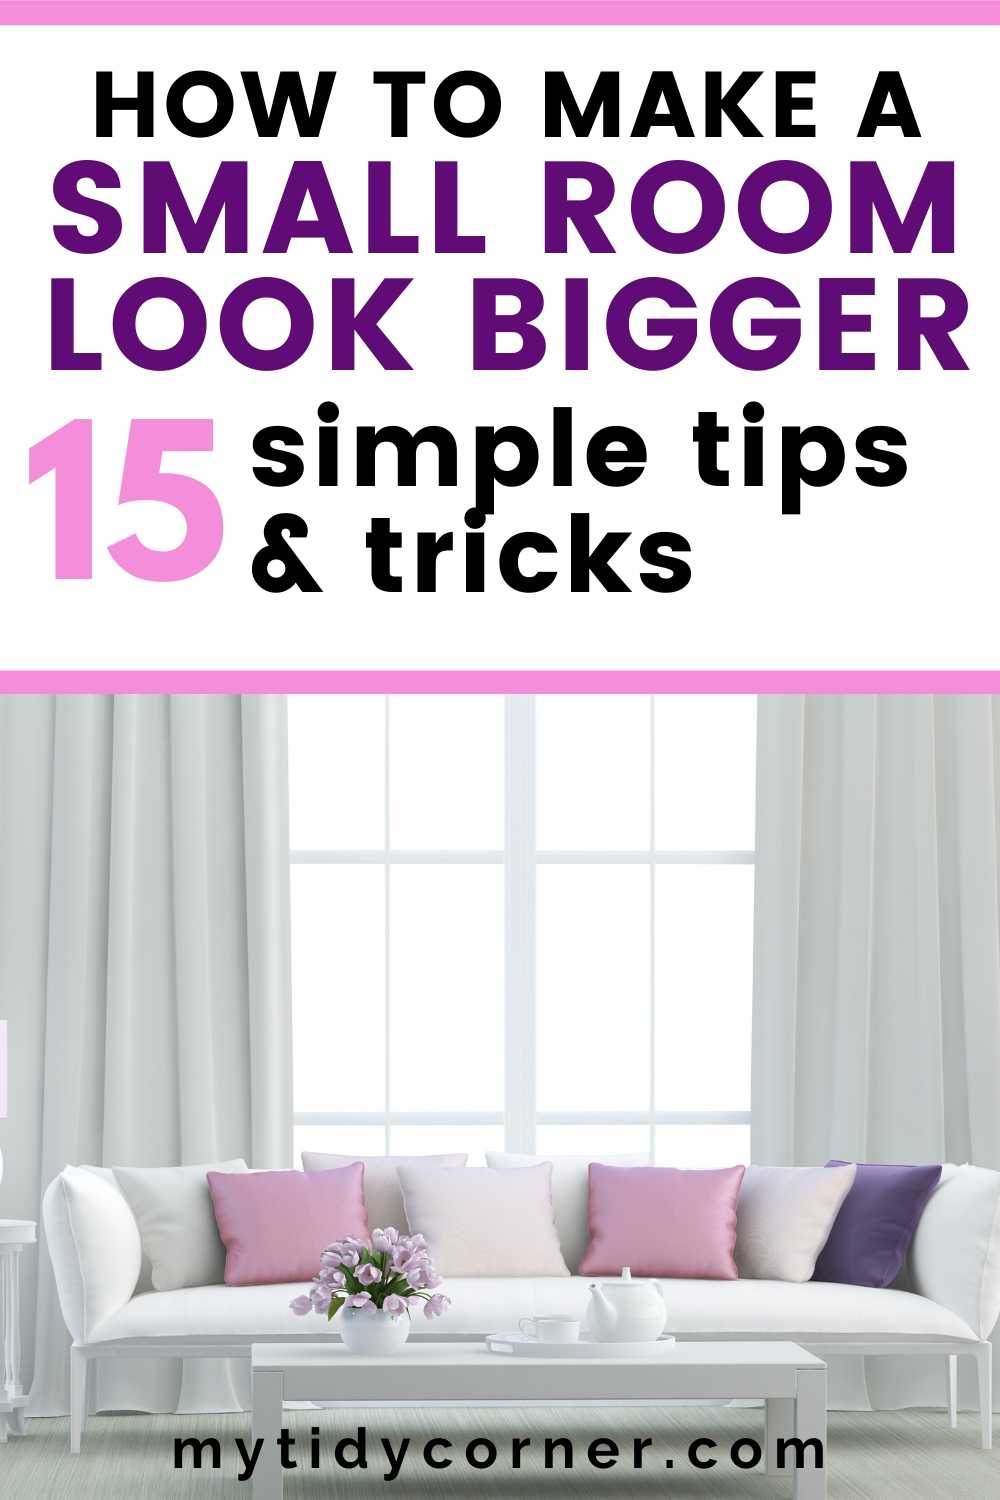 How to make a small room look larger